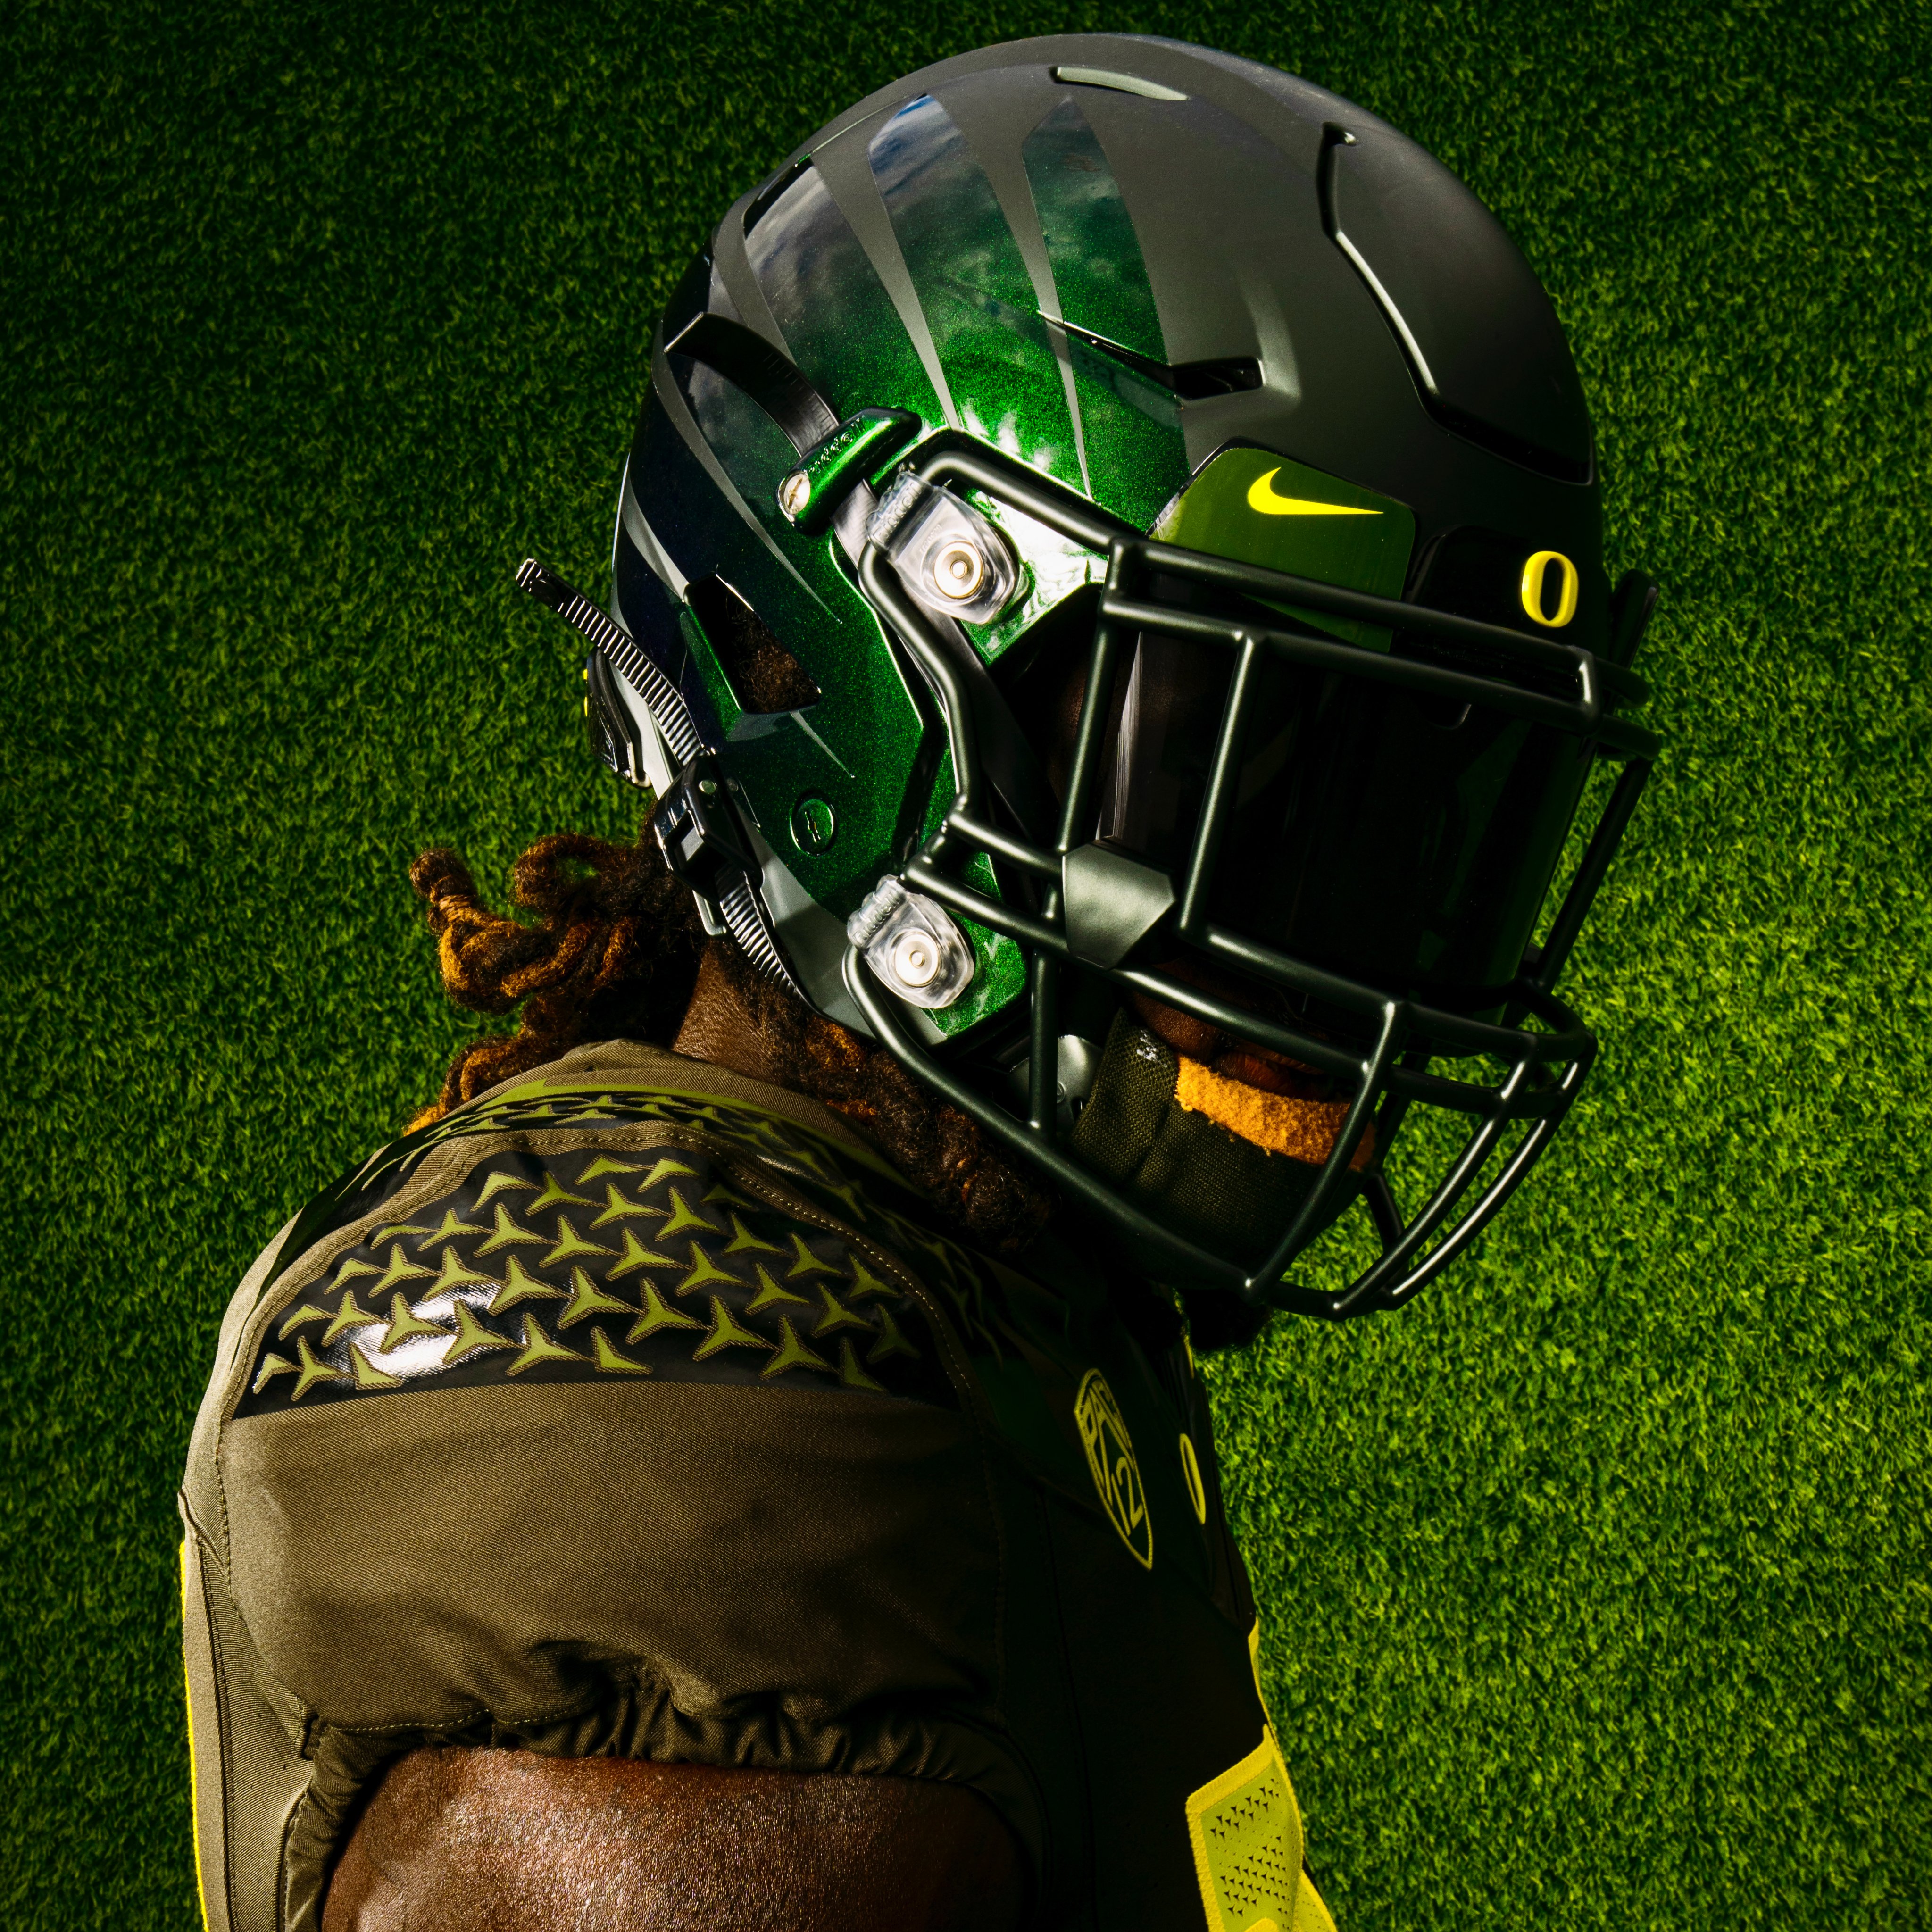 Oregon Football on X: Mighty Oregon. Presenting the Throwback uniforms -  retail available soon. #GoDucks  / X